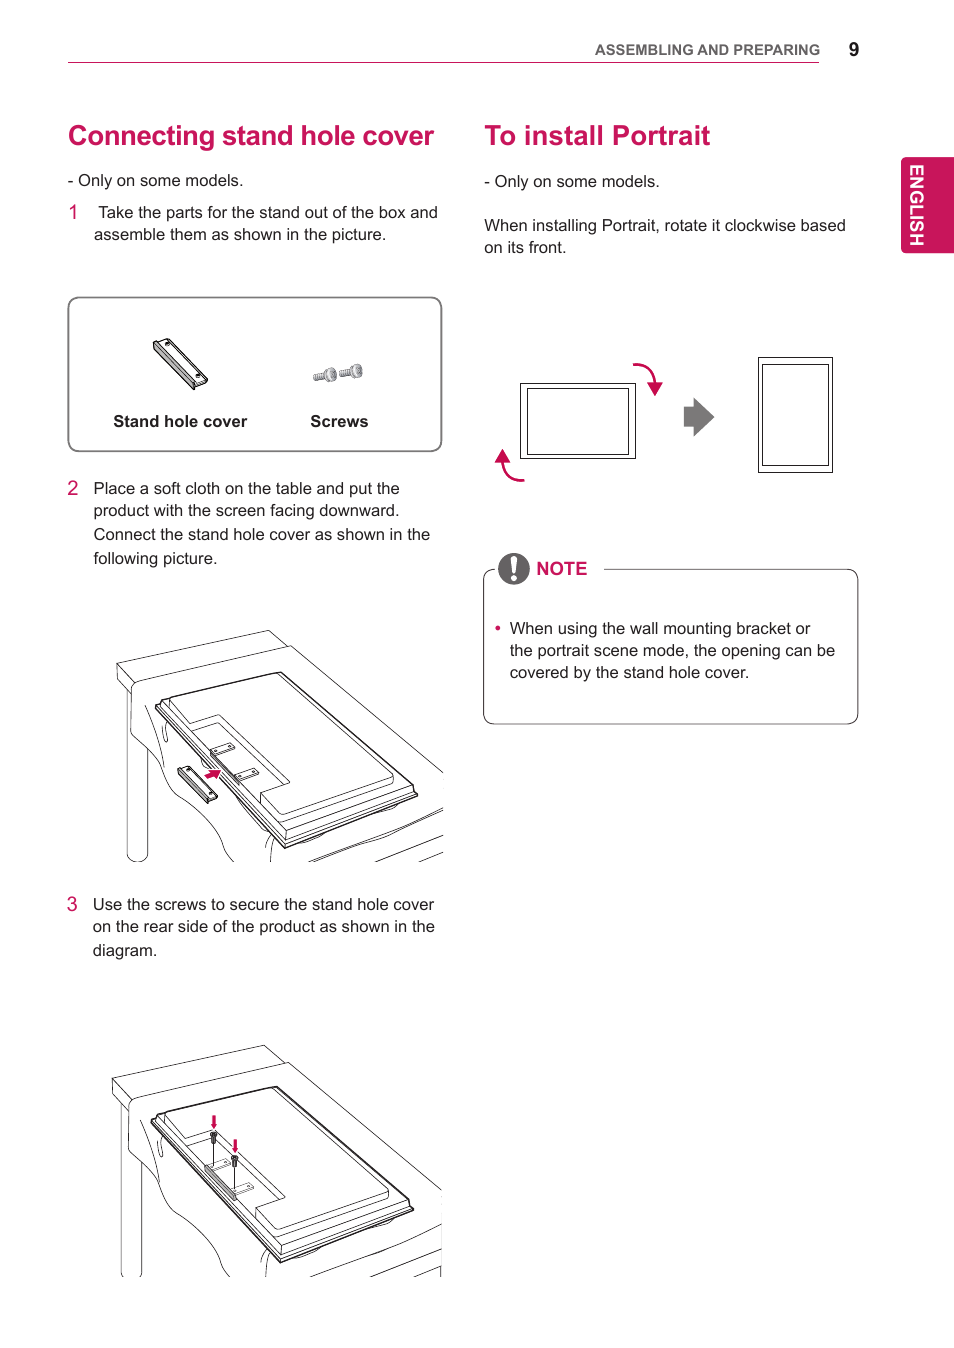 Connecting stand hole cover, To install portrait | LG 47VL10 User Manual | Page 9 / 48